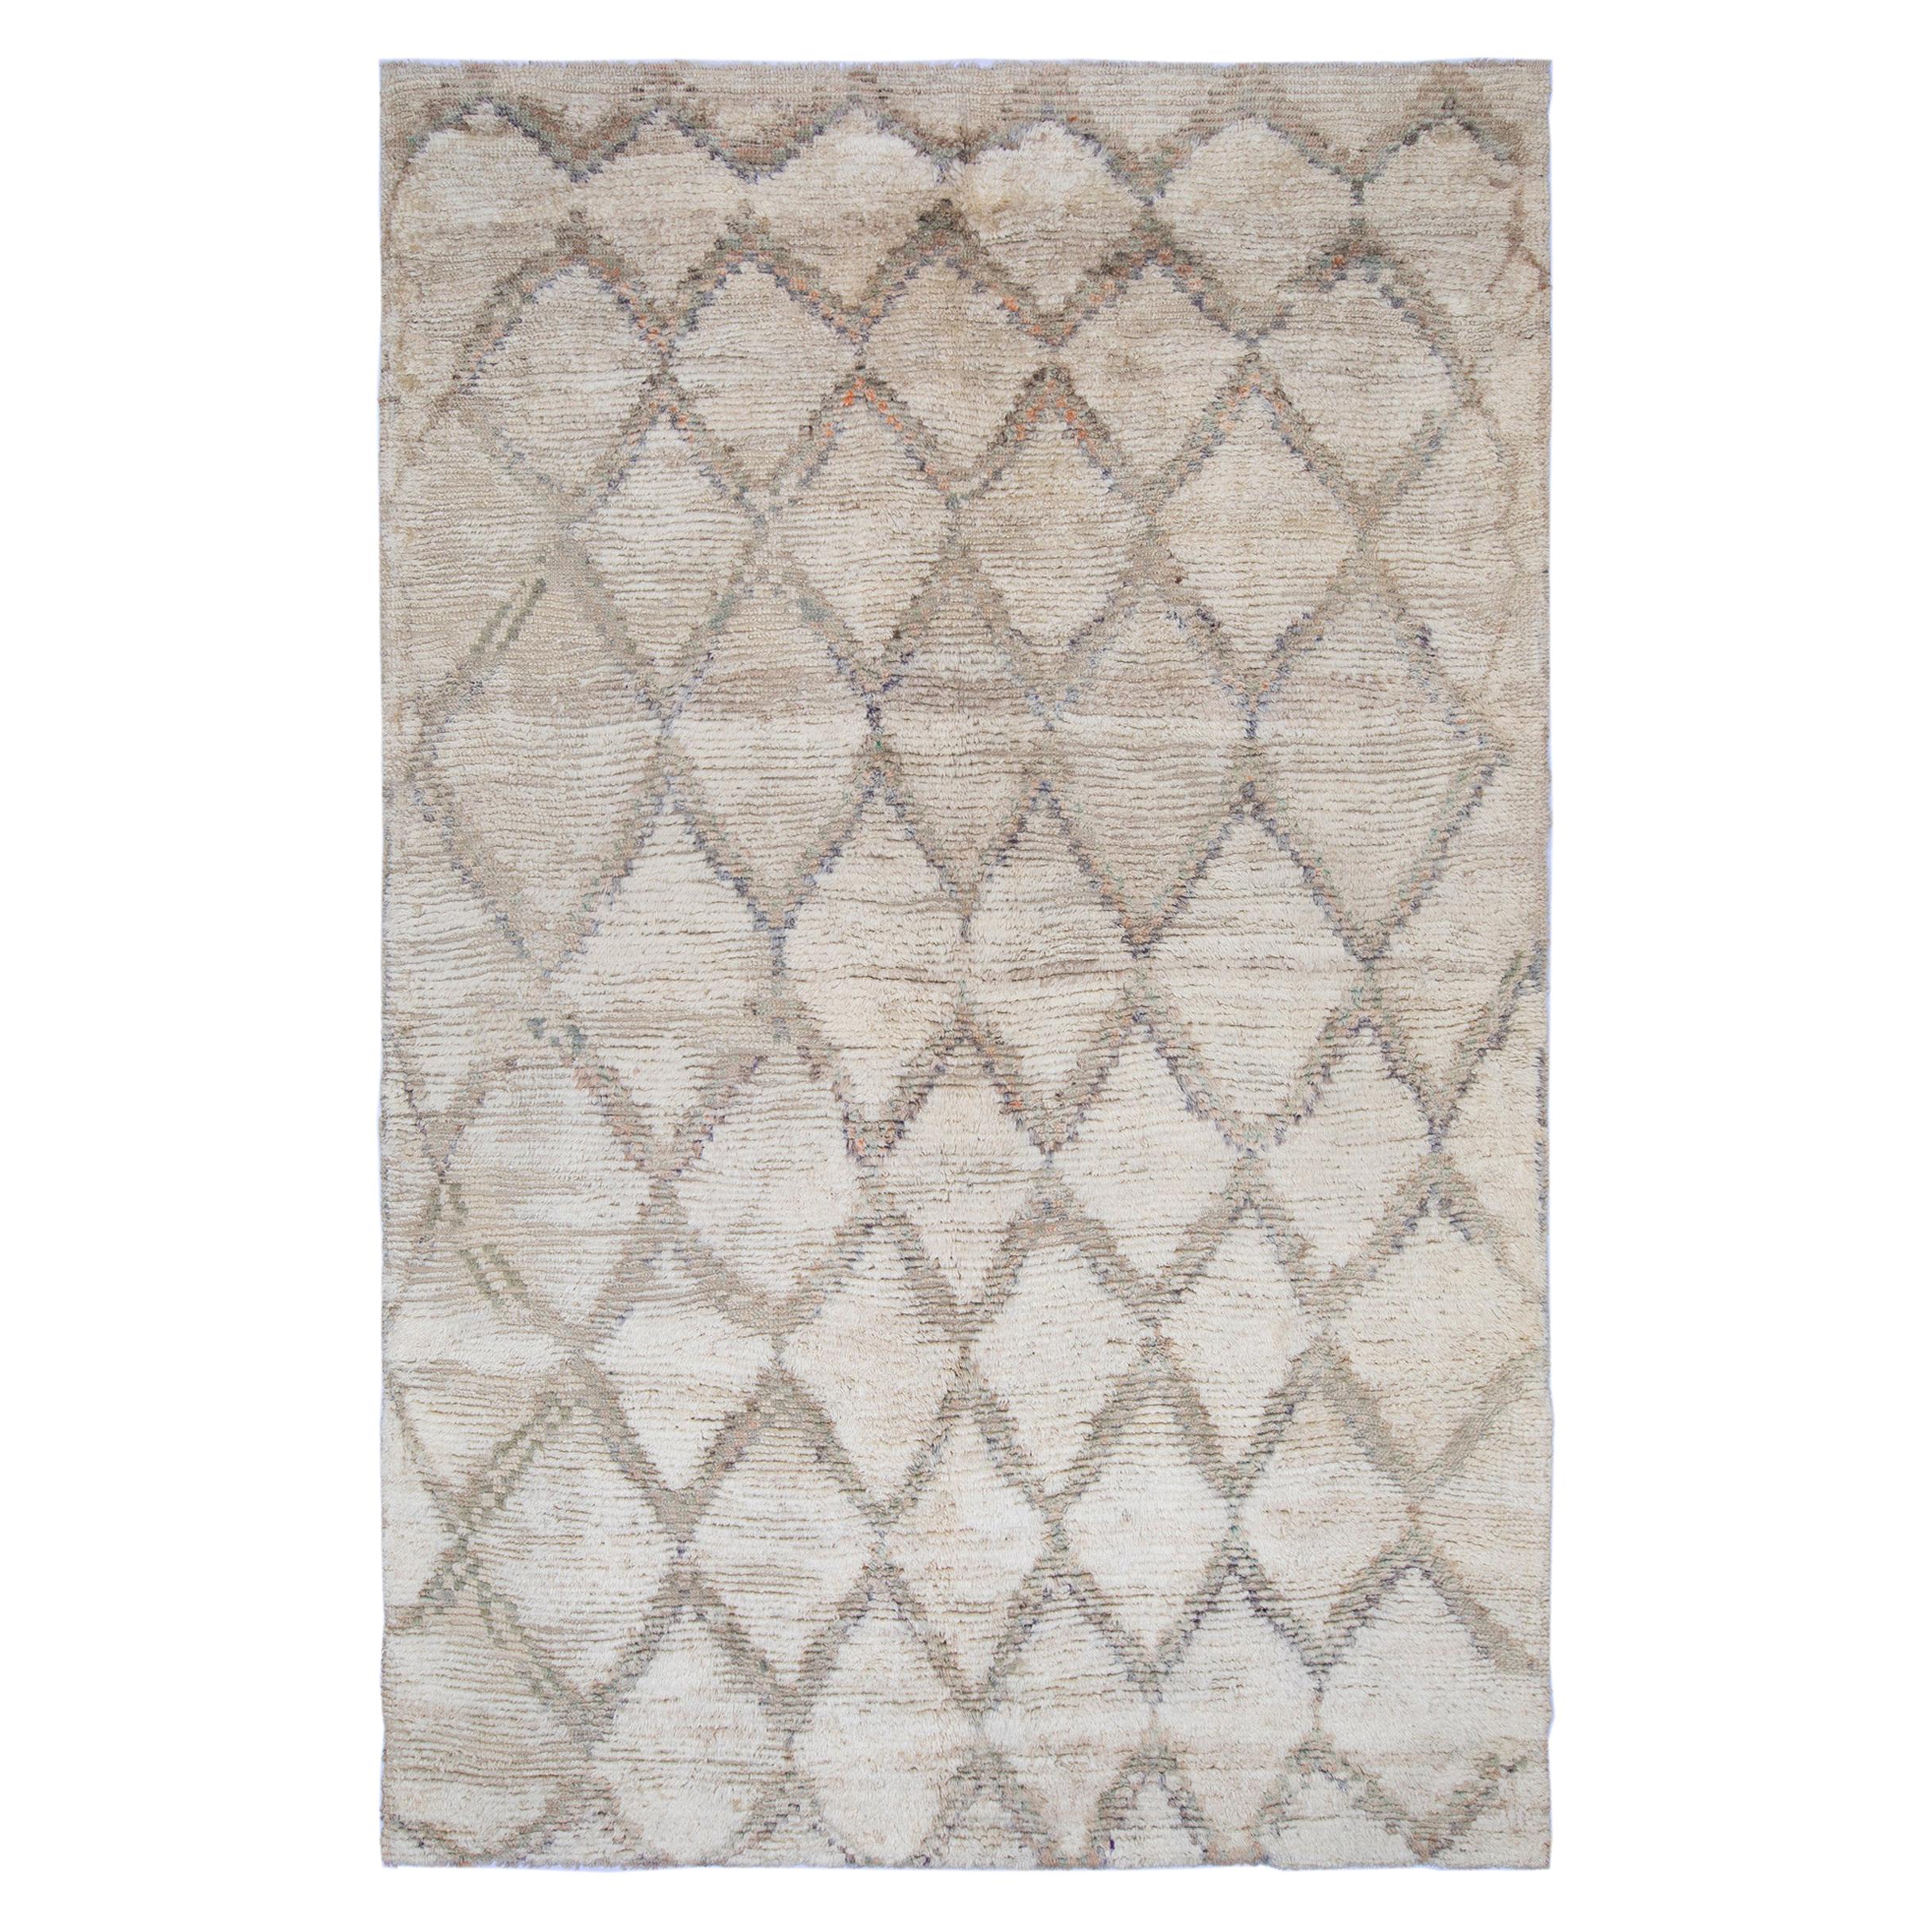 Vintage Moroccan Hand Knotted Diamond Pattern Rug in Sand and Beige Color For Sale